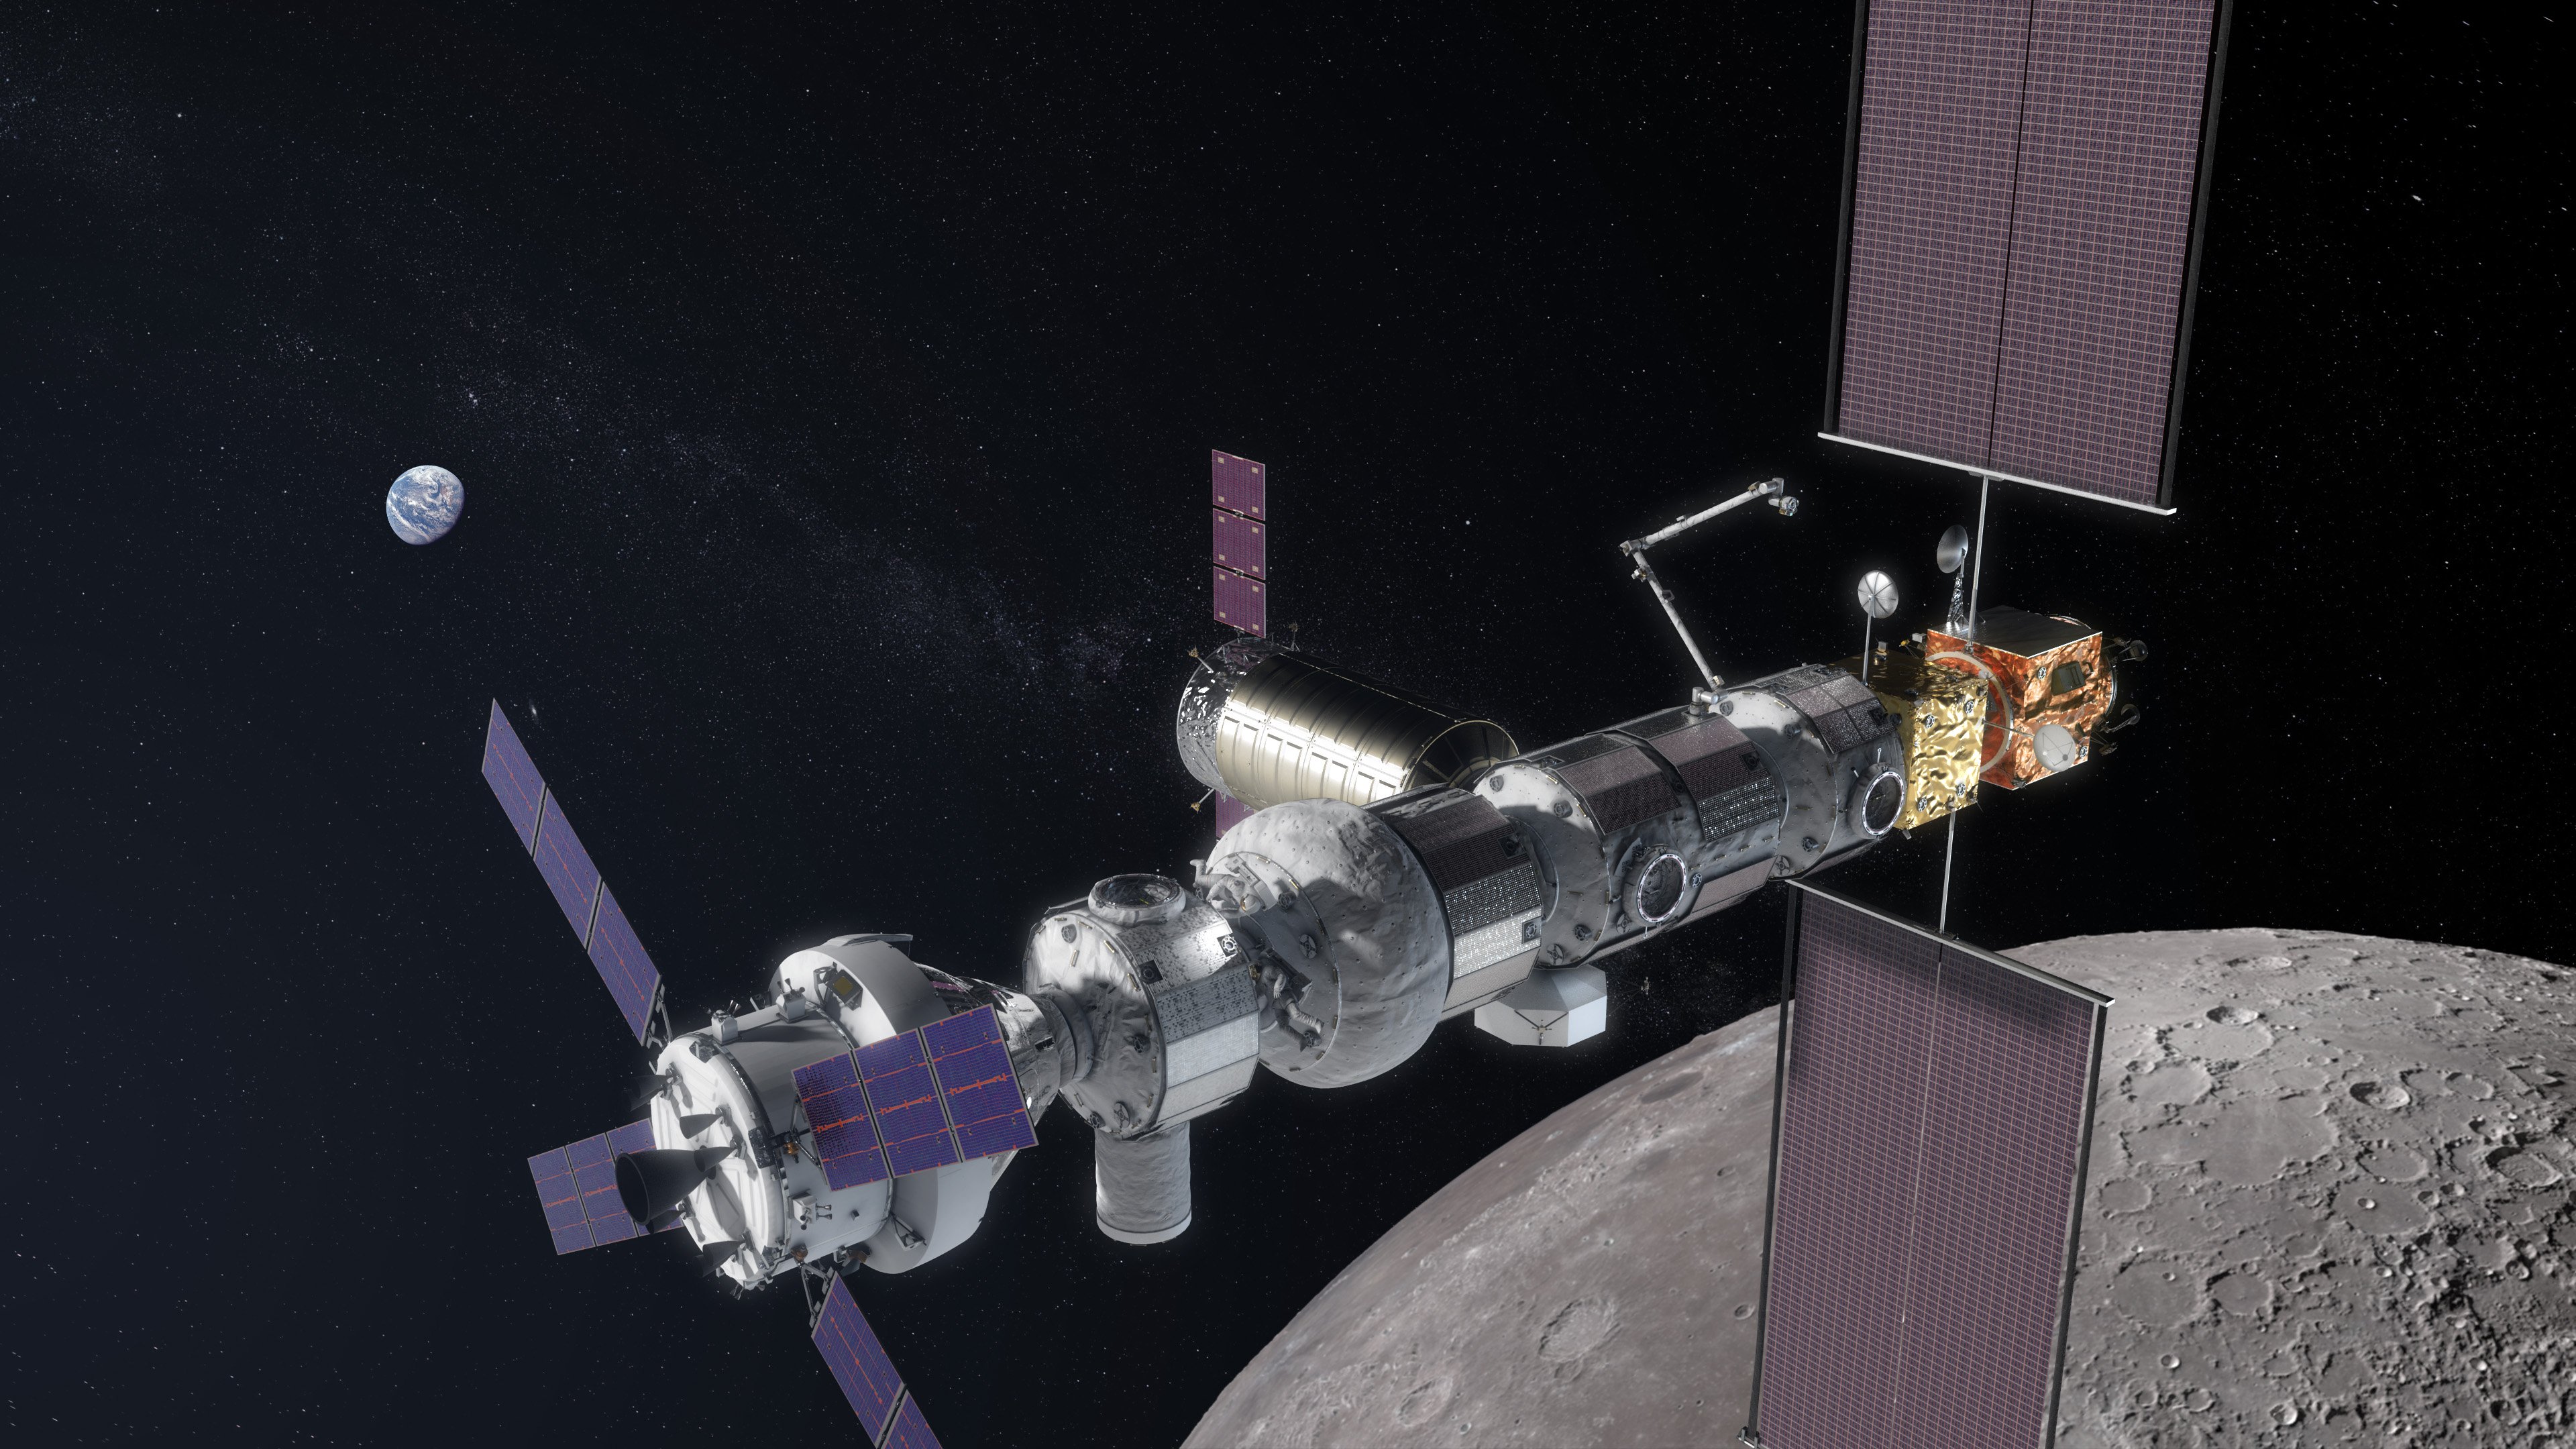 ISS want to close? The United States will launch the lunar station in 2023